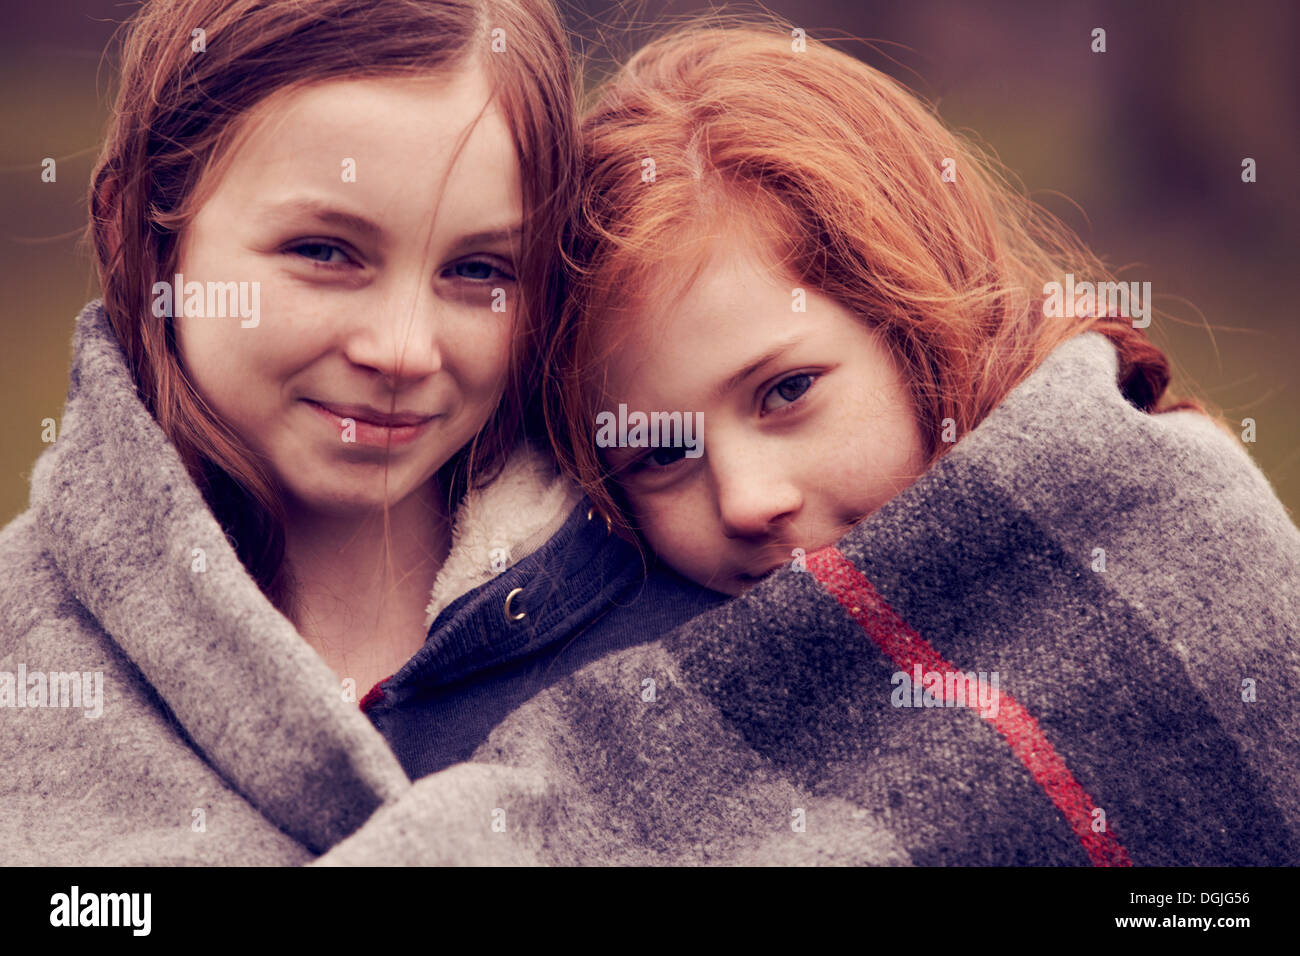 Portrait of girls wrapped in a blanket outdoors Stock Photo